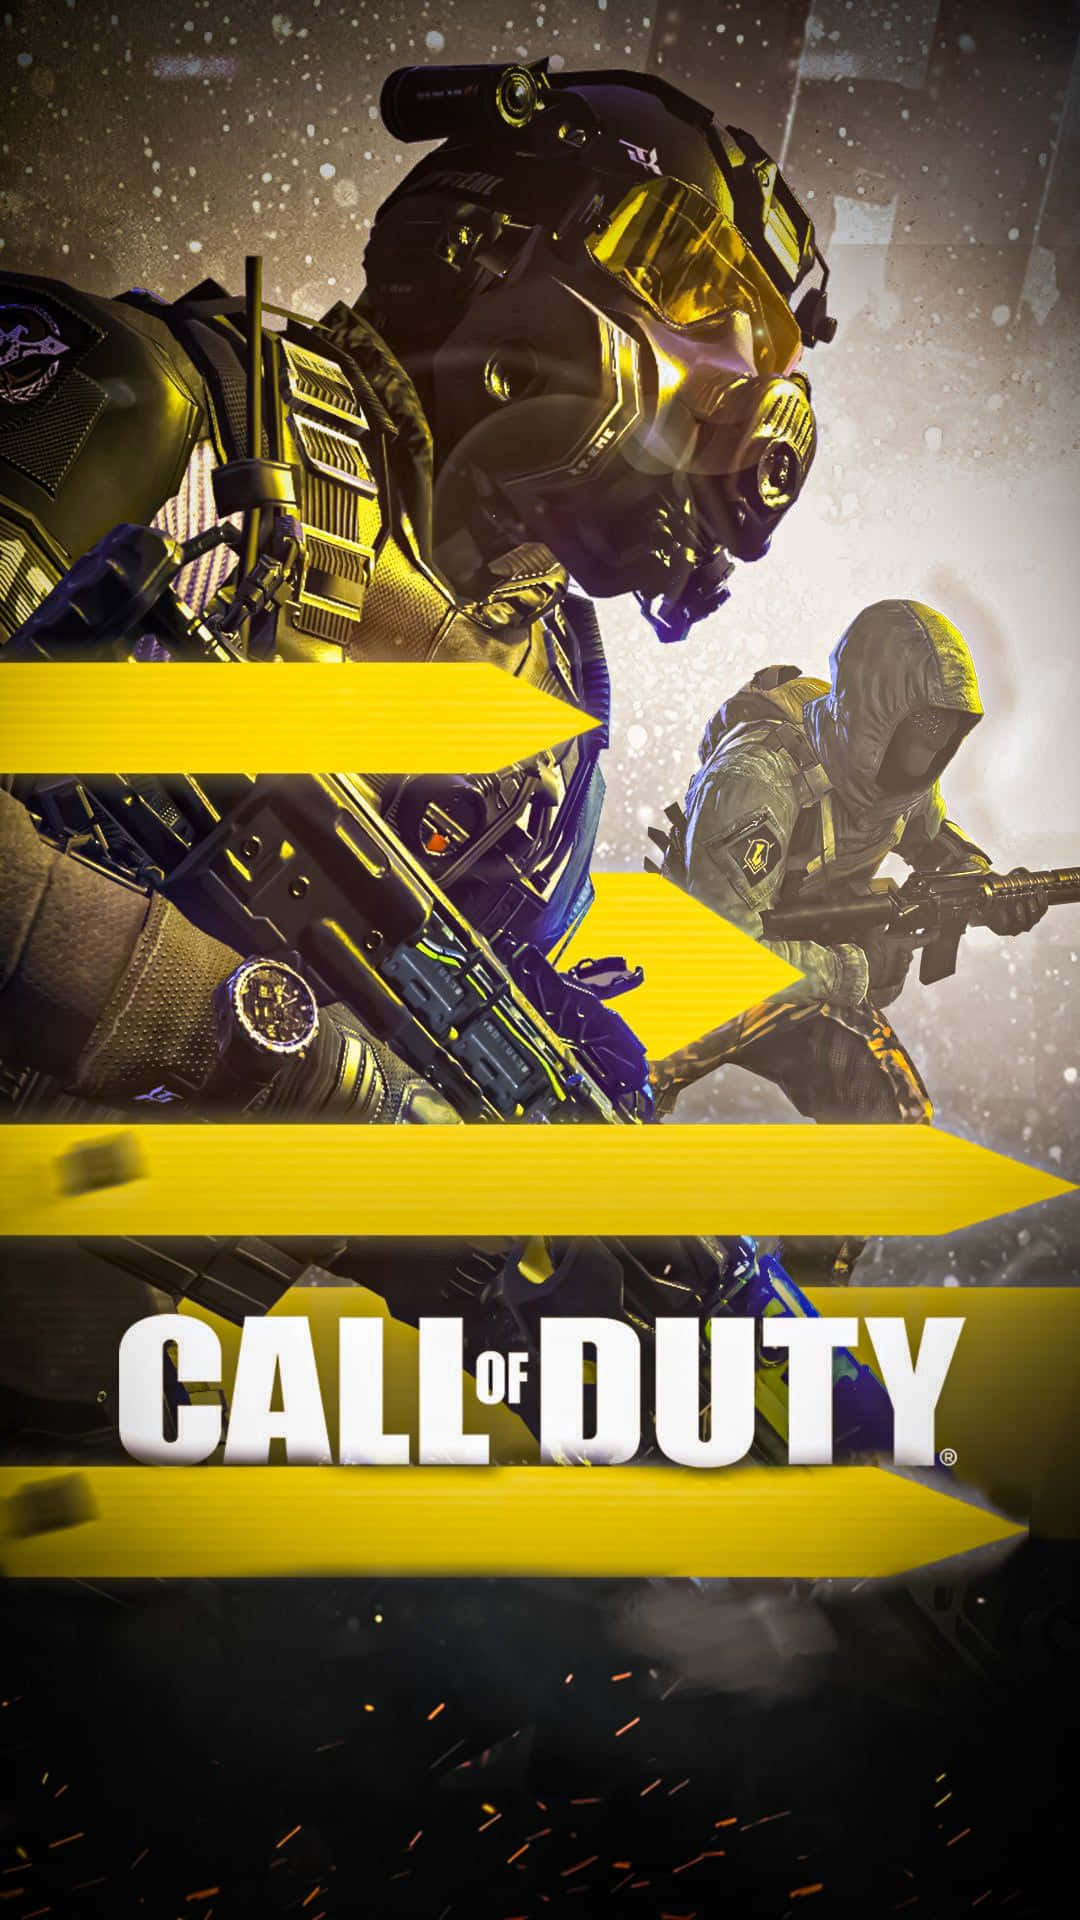 Join the action with Call Of Duty Mobile!